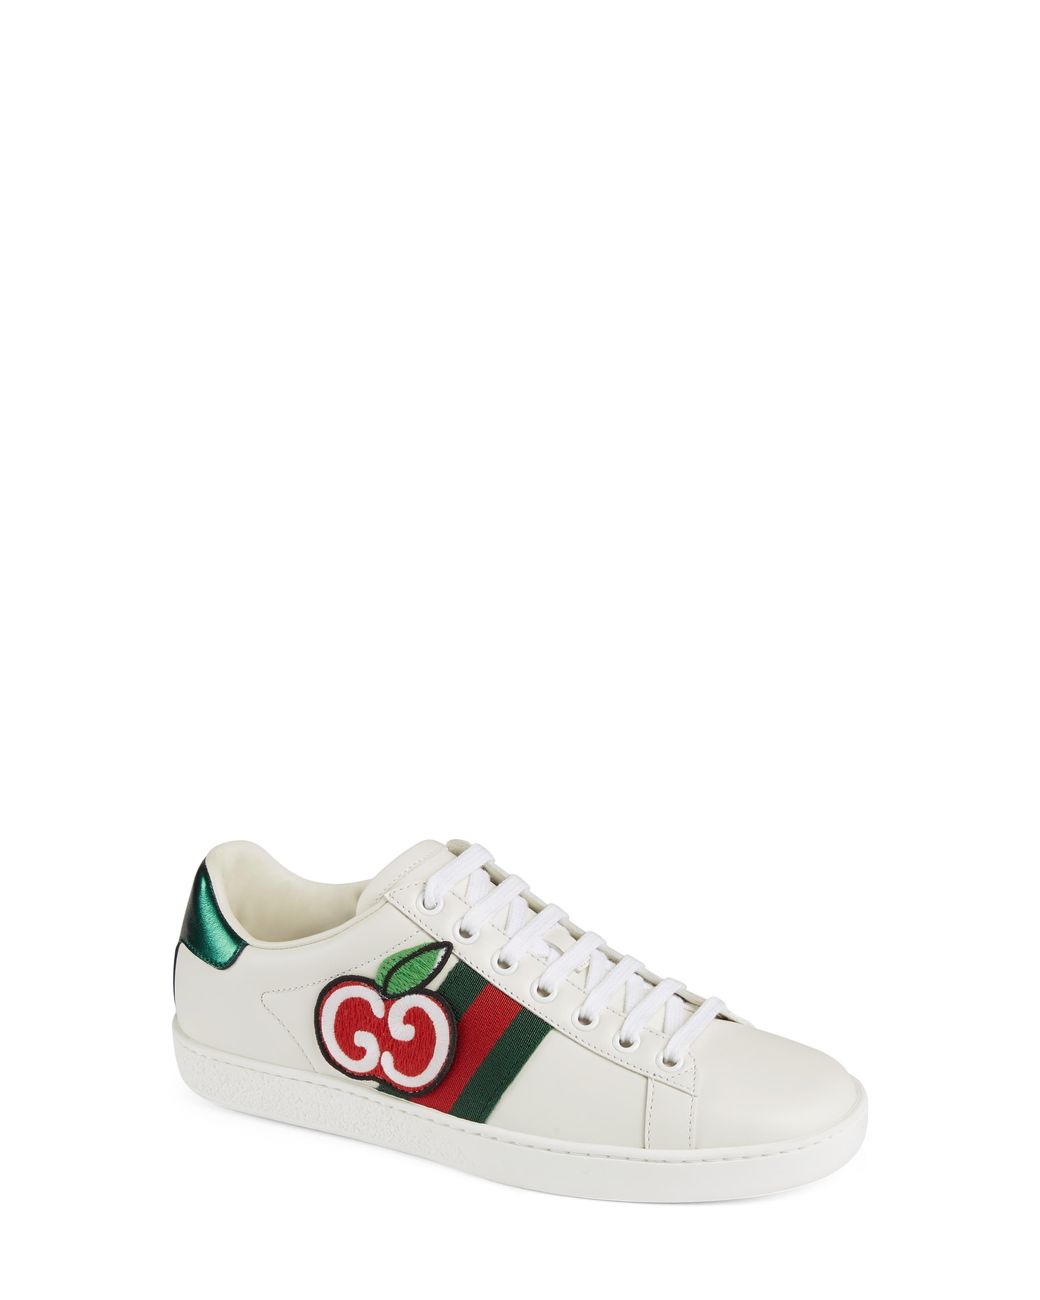 Gucci New Ace Double G Logo Cherry 